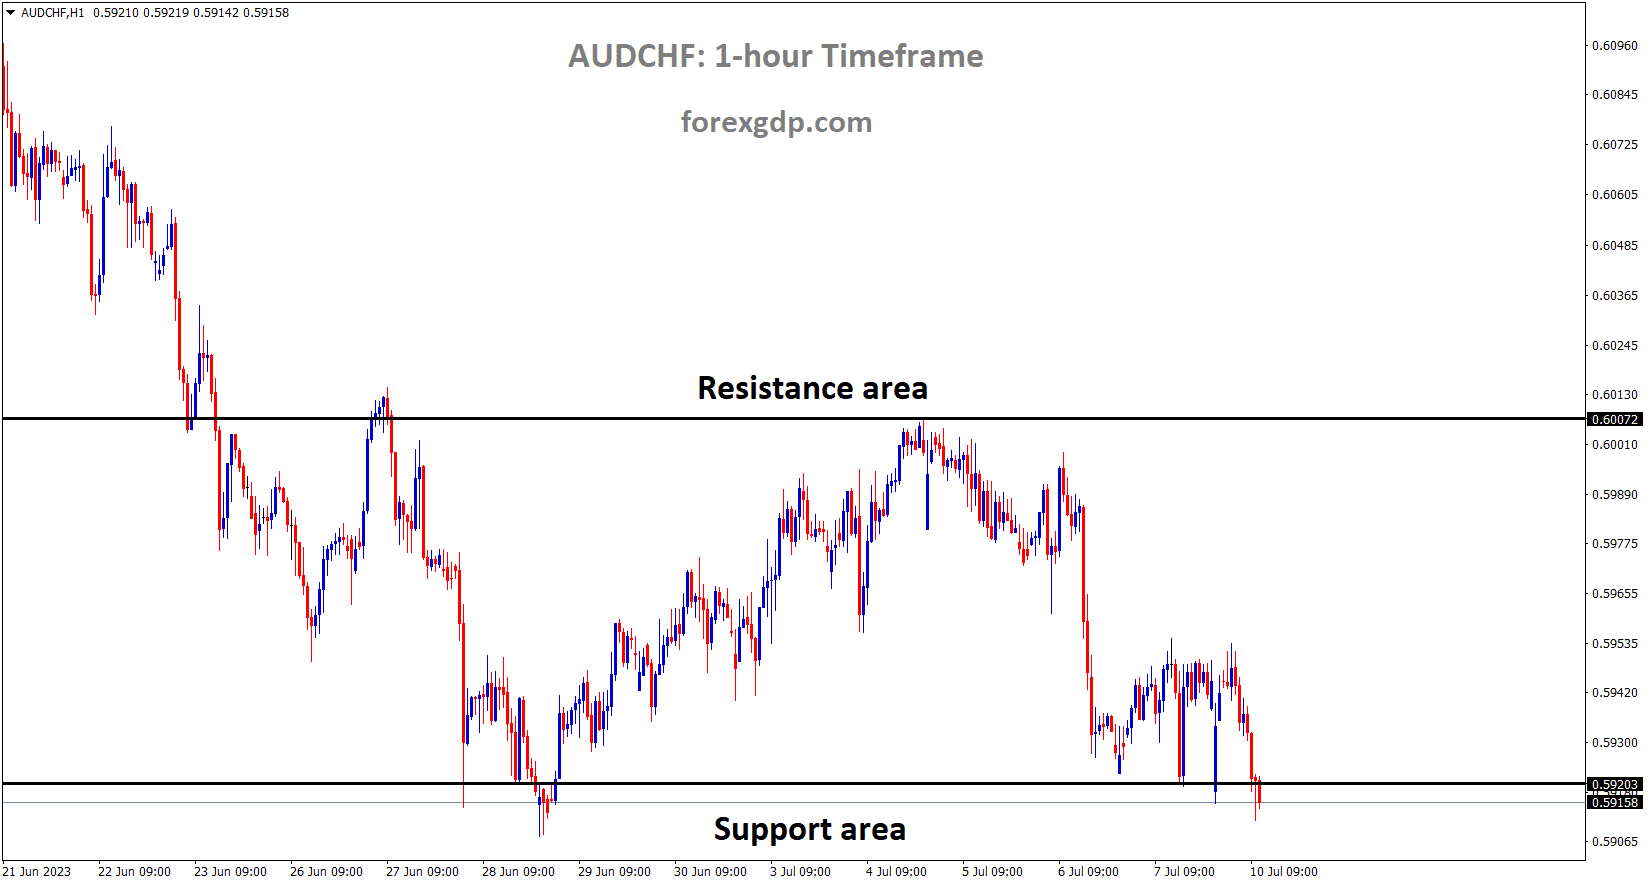 AUDCHF is moving in the Box pattern and the market has reached the horizontal support area of the pattern